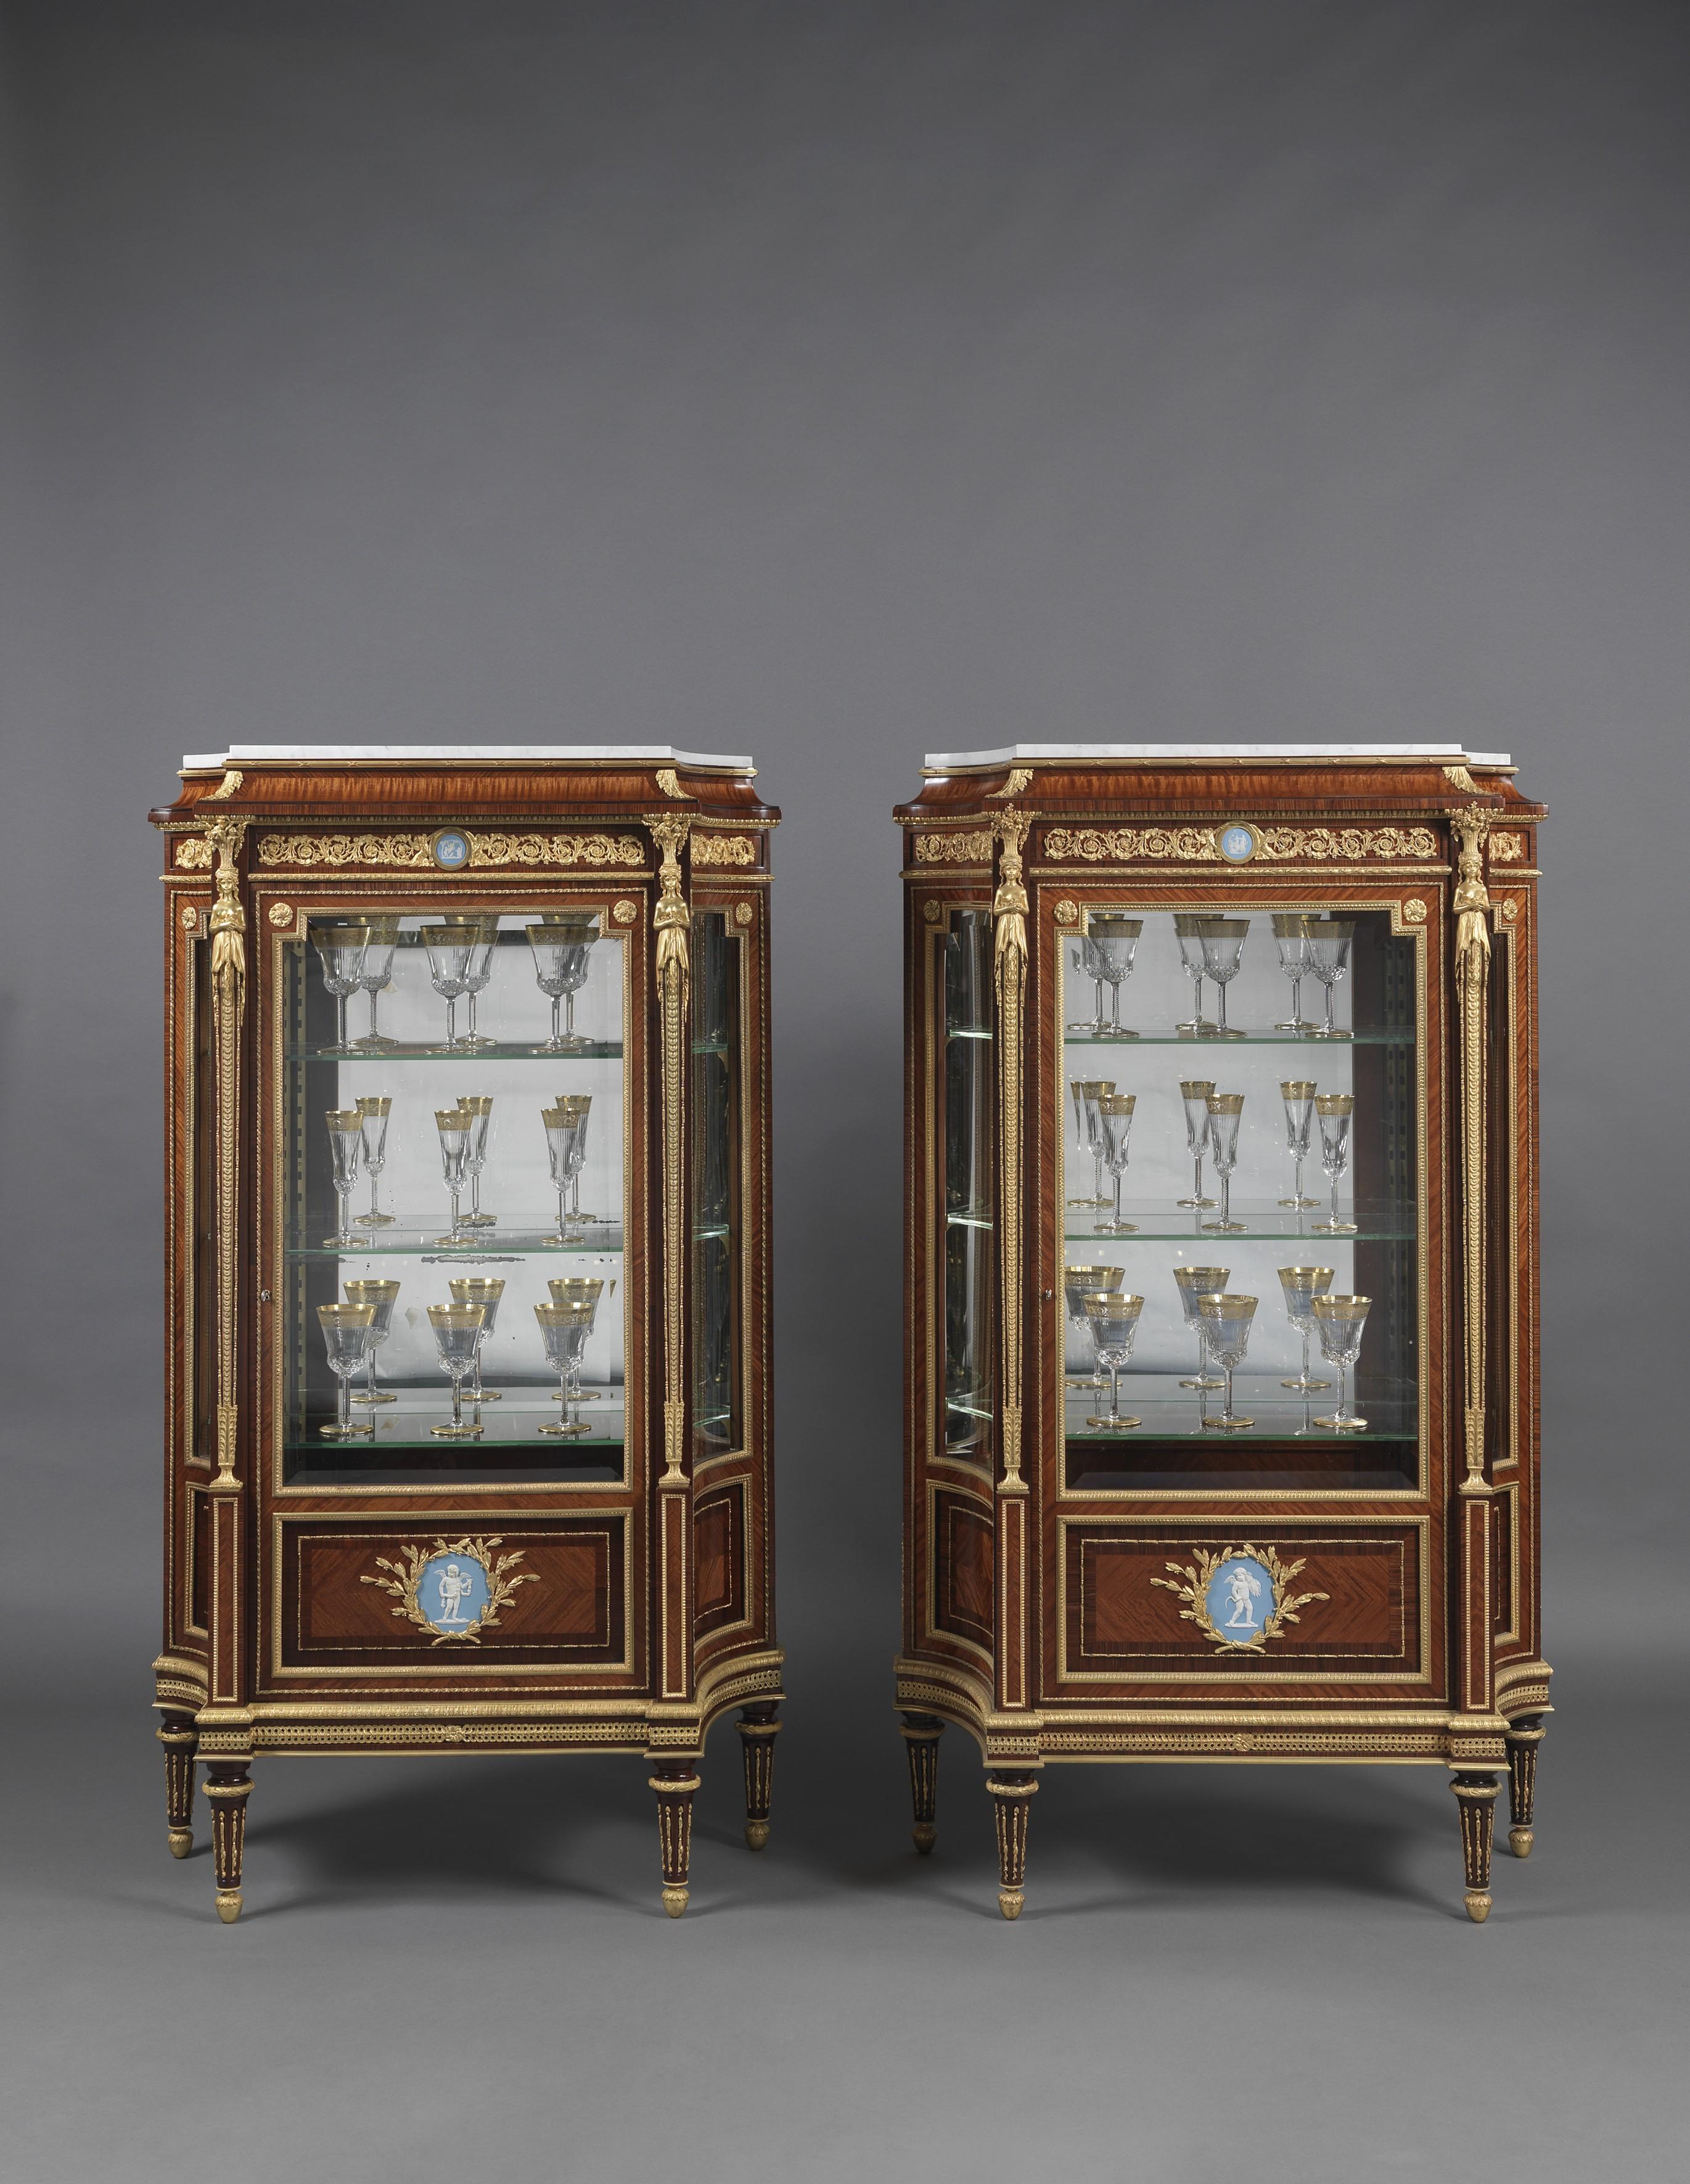 An important pair of Louis XVI style gilt-bronze mounted vitrines with wedgwood Jasperware plaques, by Joseph-Emmanuel Zwiener.

French, circa 1880. 

Stamped 'NZ', 'NZ.309' and 'ZJ' to the reverse of the bronze mounts. 

Signed to the reverse